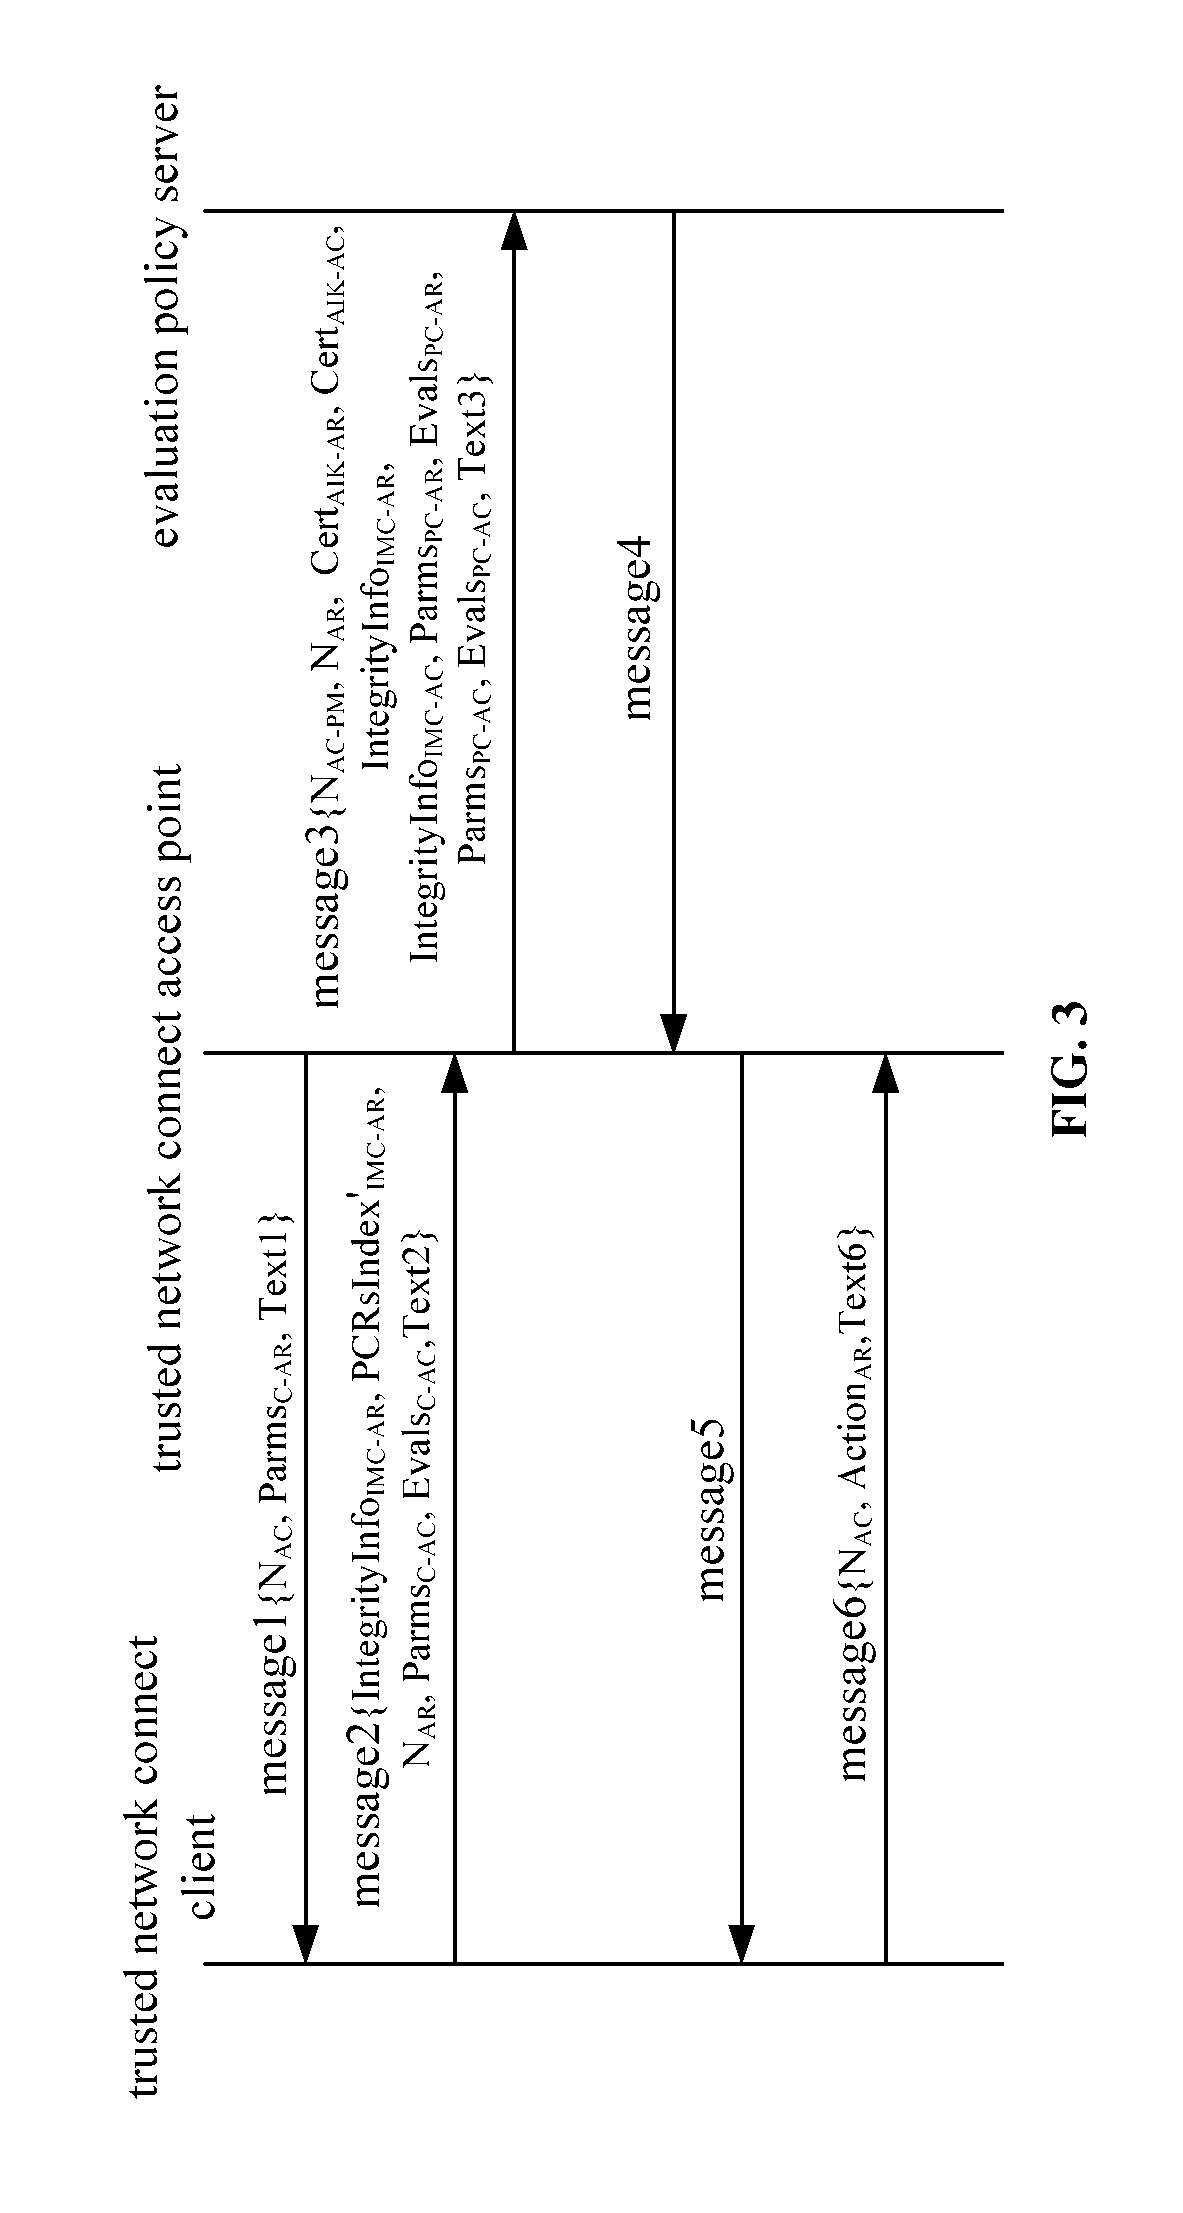 Platform authentication method suitable for trusted network connect architecture based on tri-element peer authentication